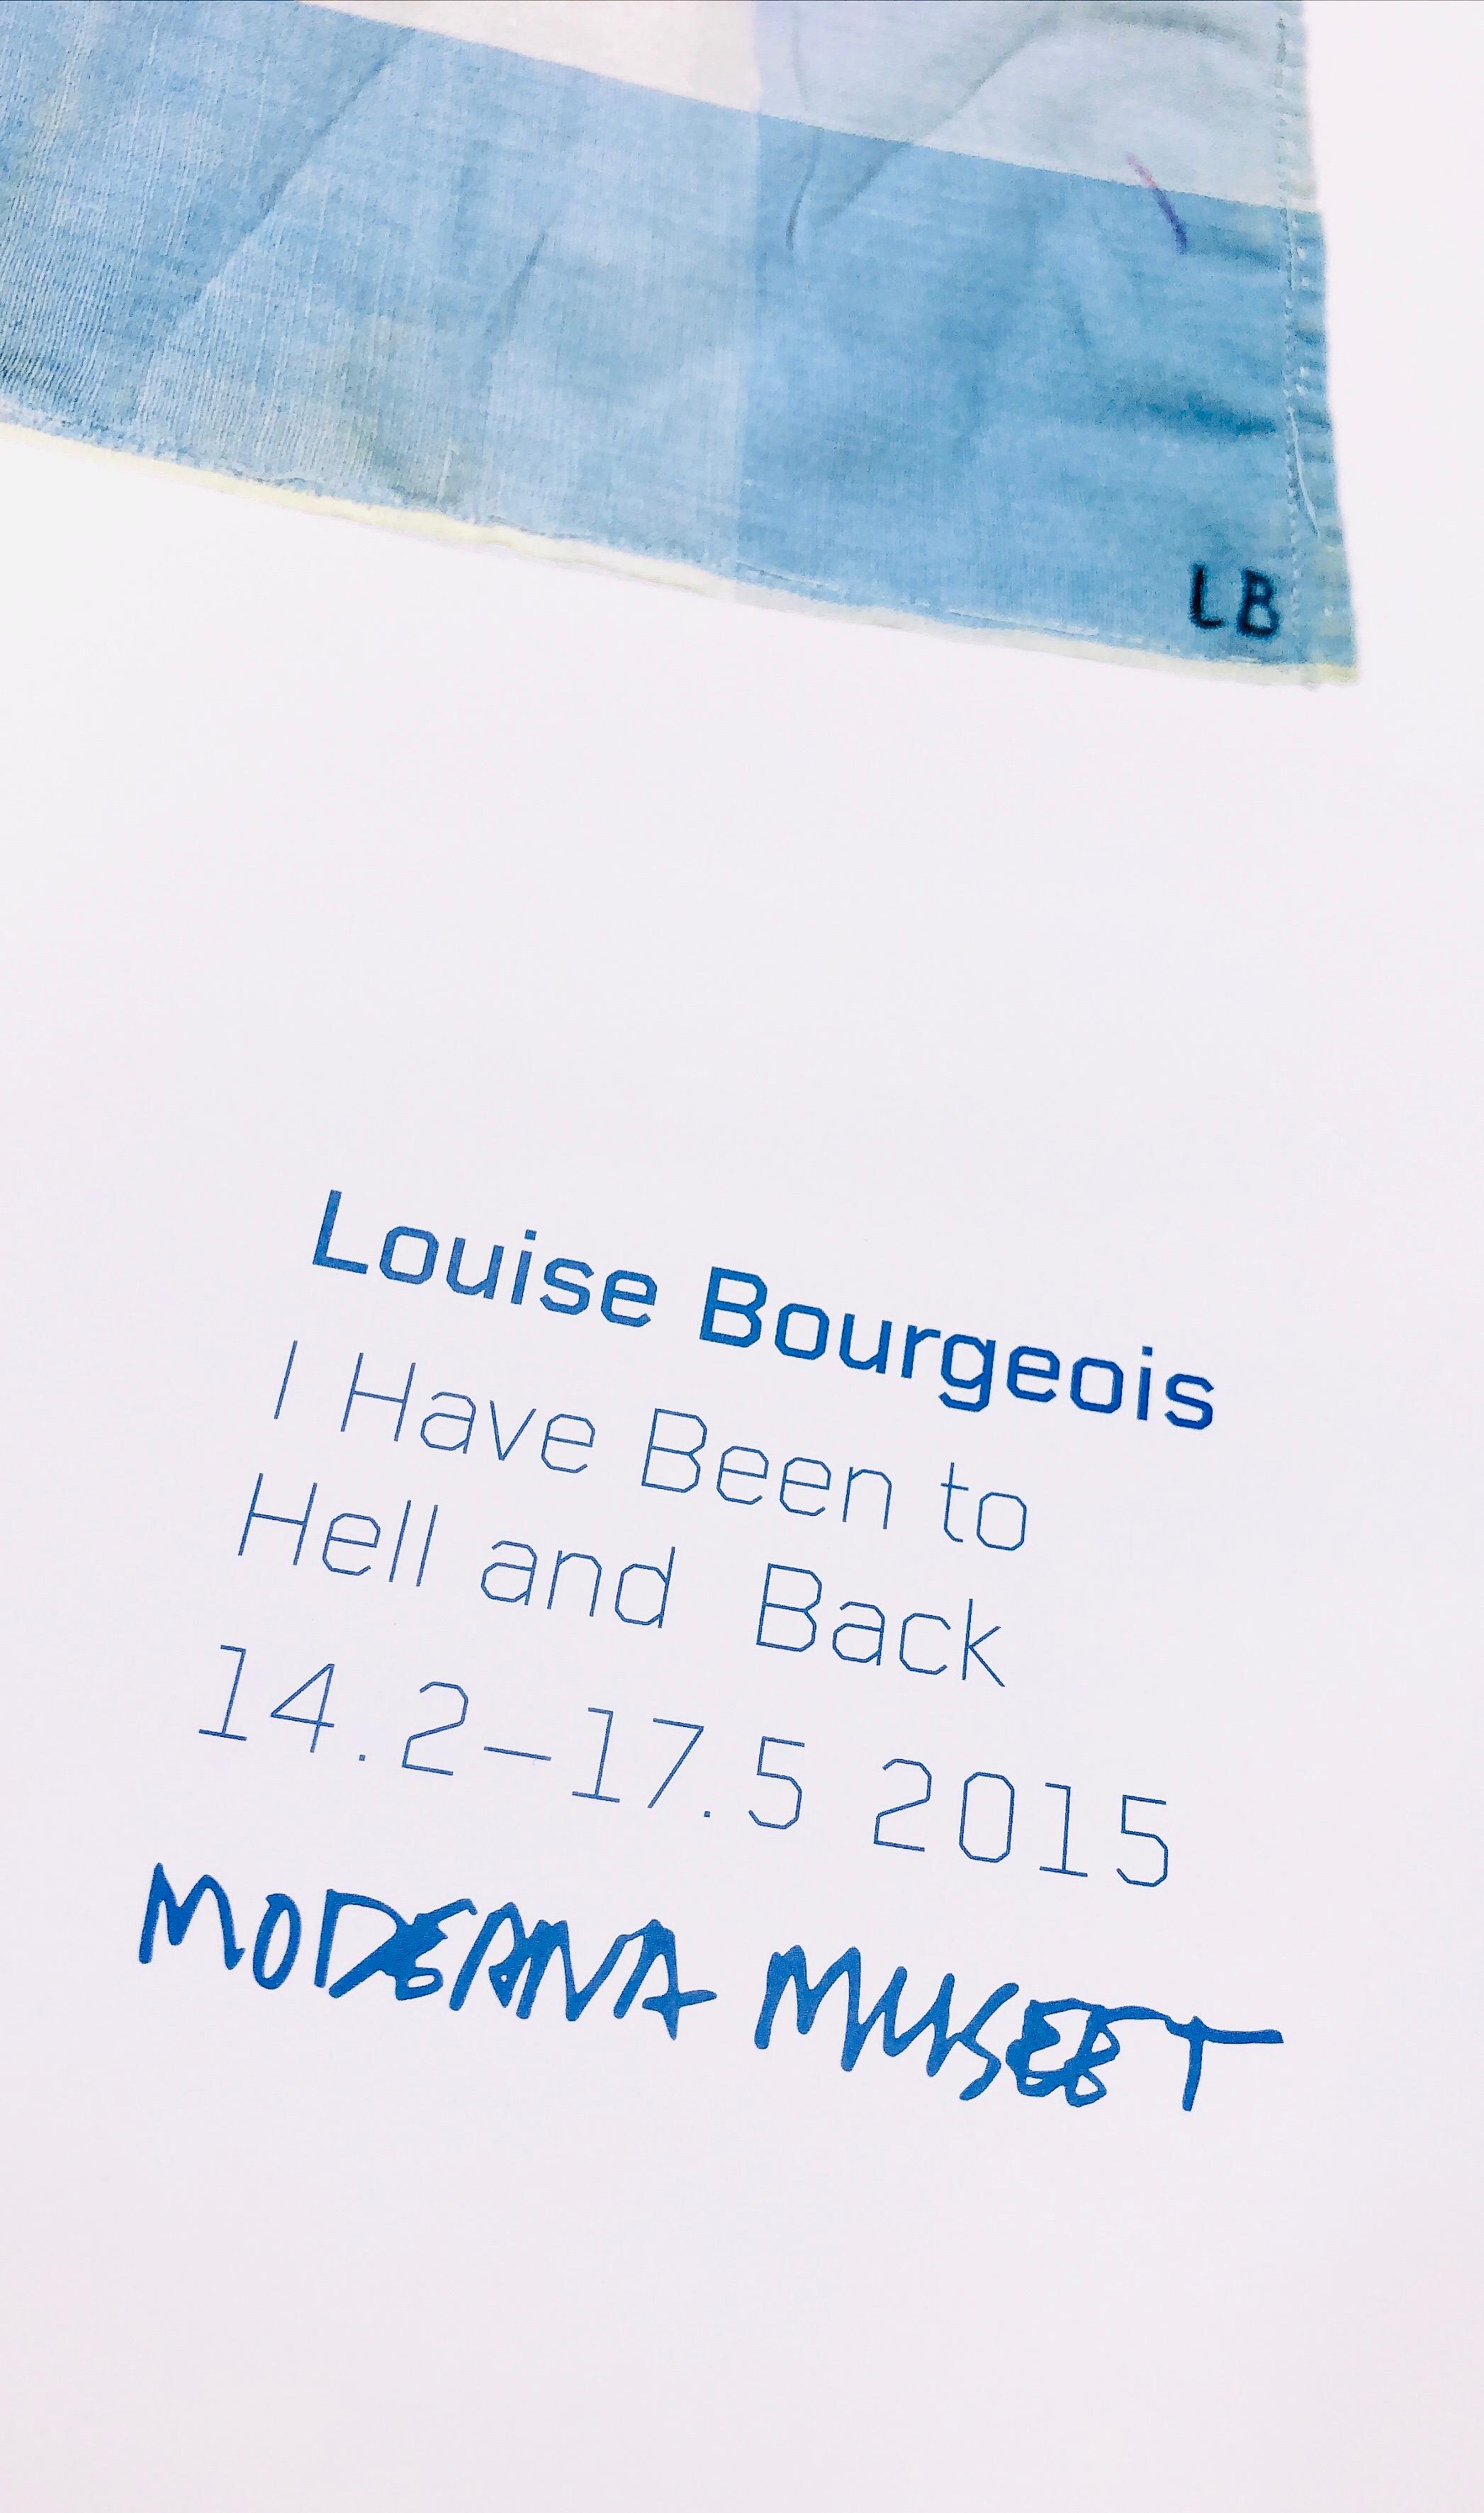 Poster published on the occasion of Louise Bourgeois exhibition at Moderna Museet, Sweden in 2015.

A-: Very good condition.

19 3/4 x 27 1/2 in
50 x 70 cm

Poster is sold unframed. Ship rolled in a protected mailing tube. Framing is available on